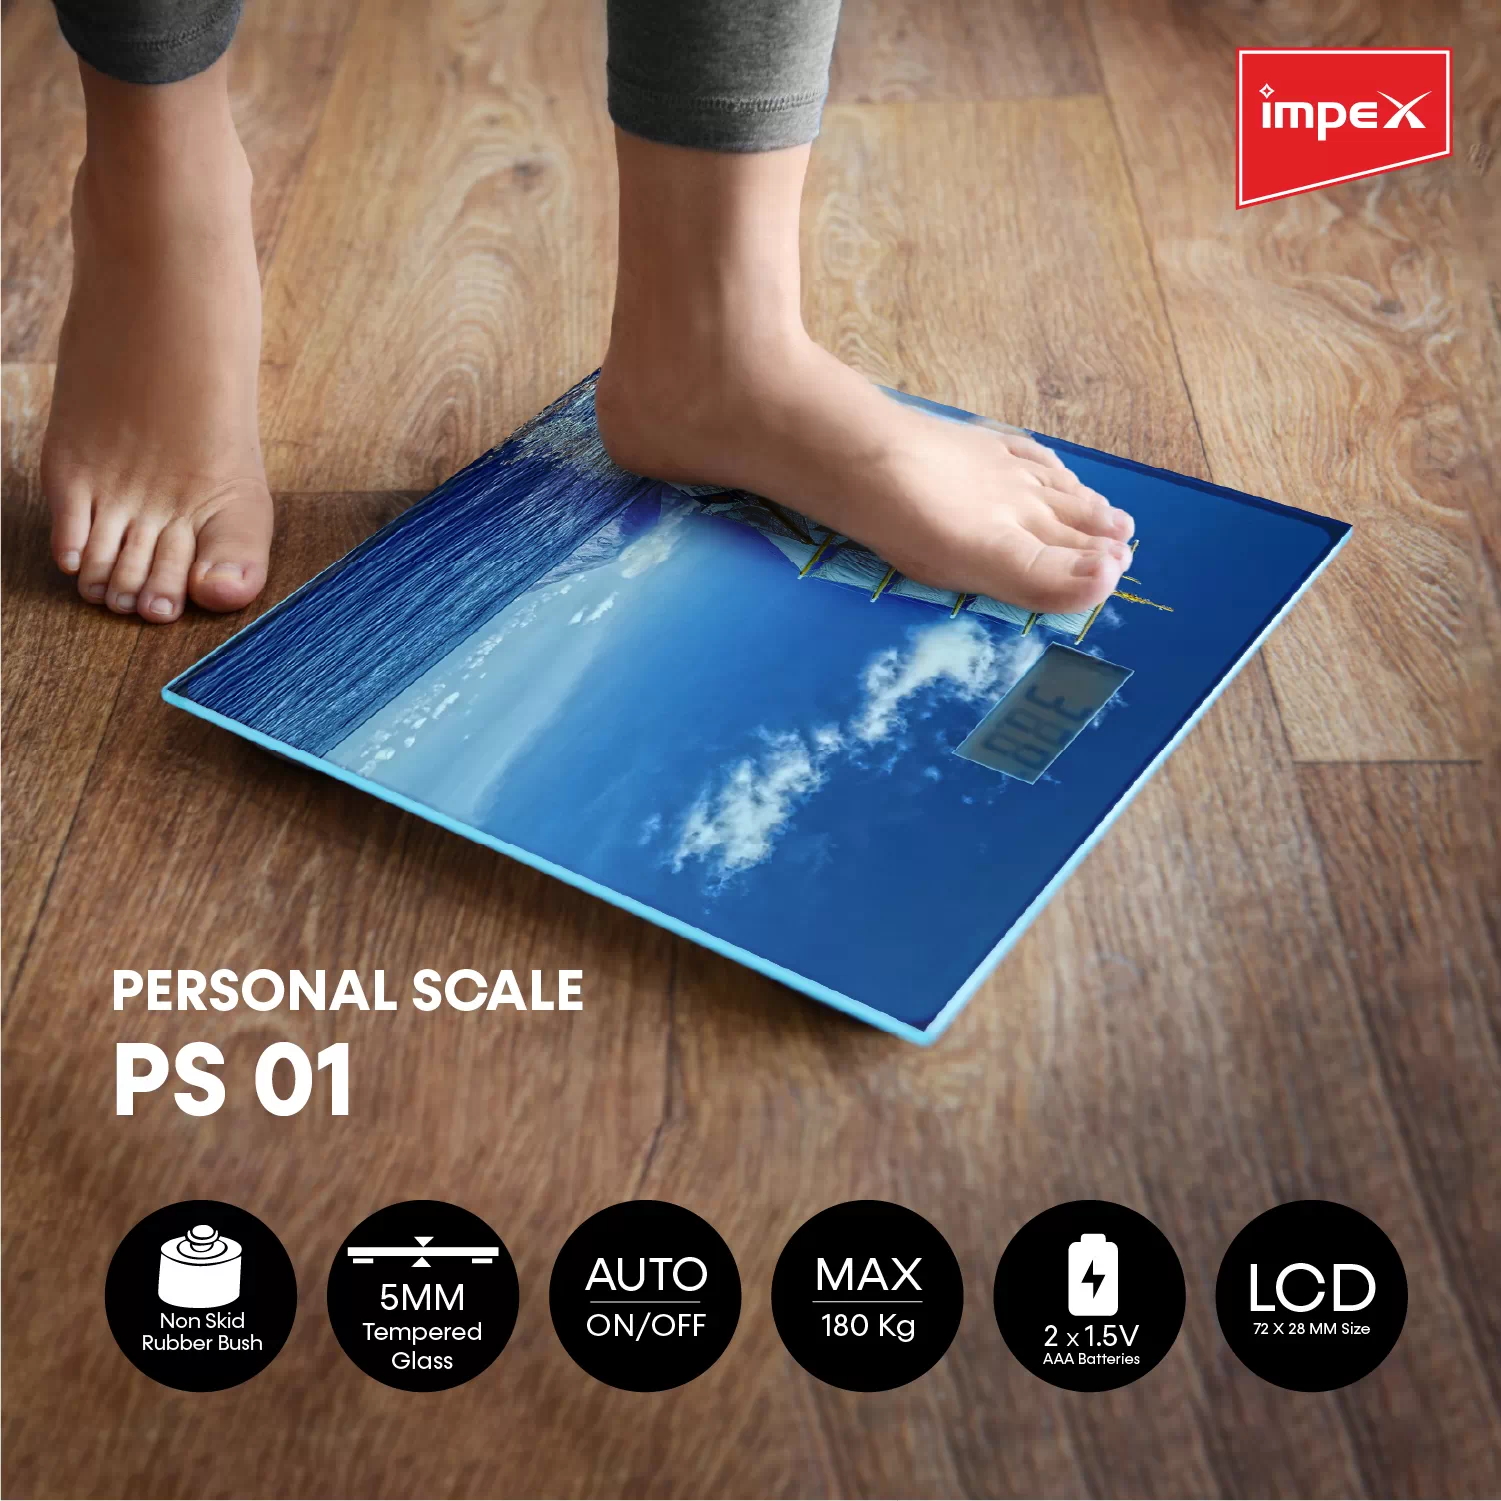 Personal Scale | PS 01